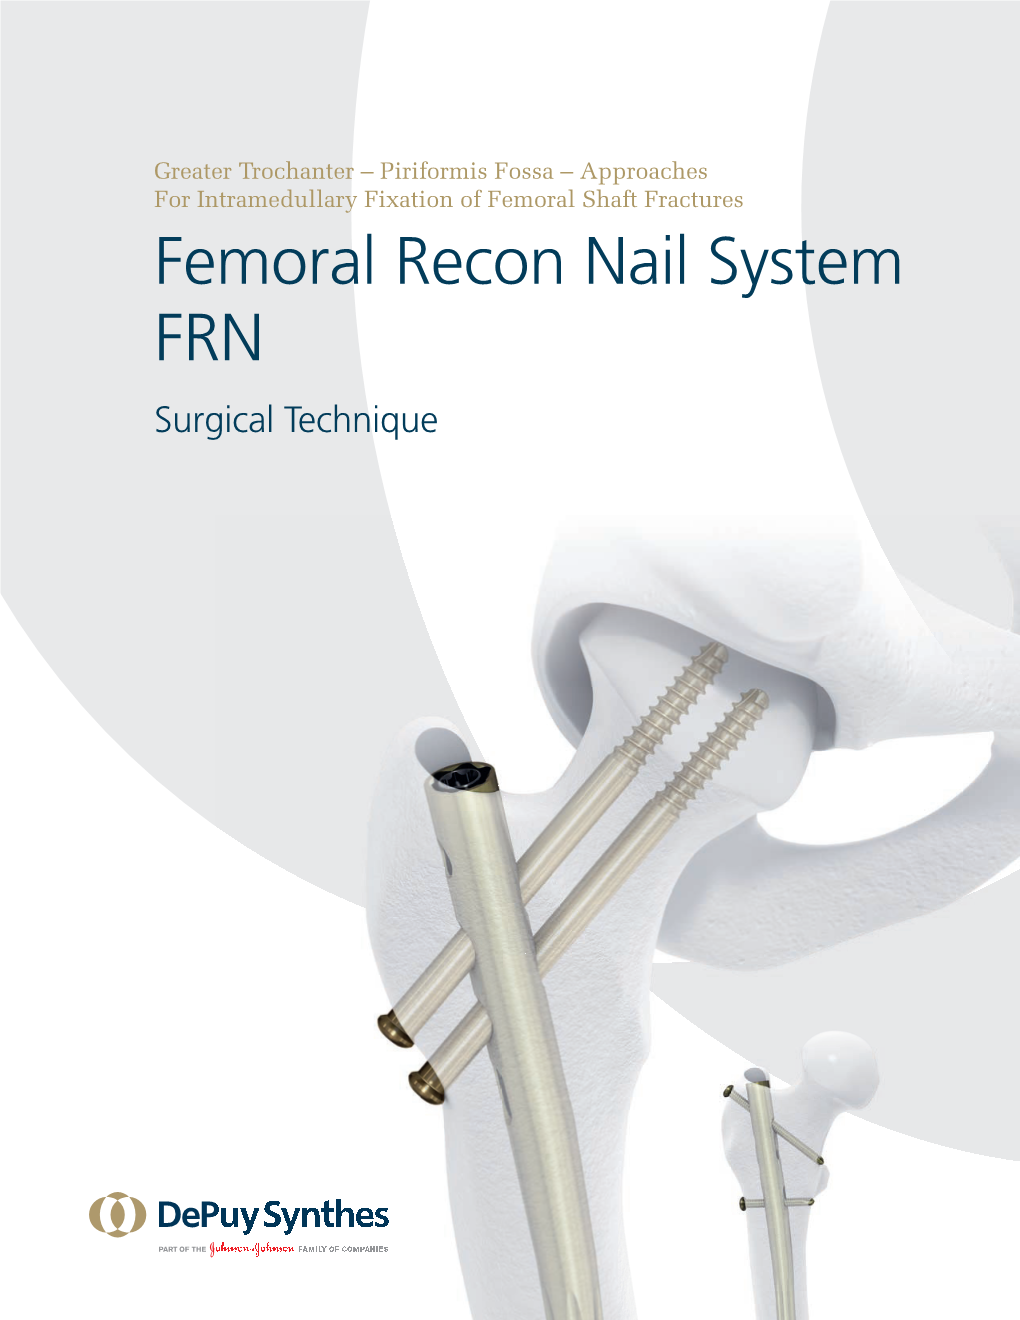 Femoral Recon Nail System FRN Surgical Technique